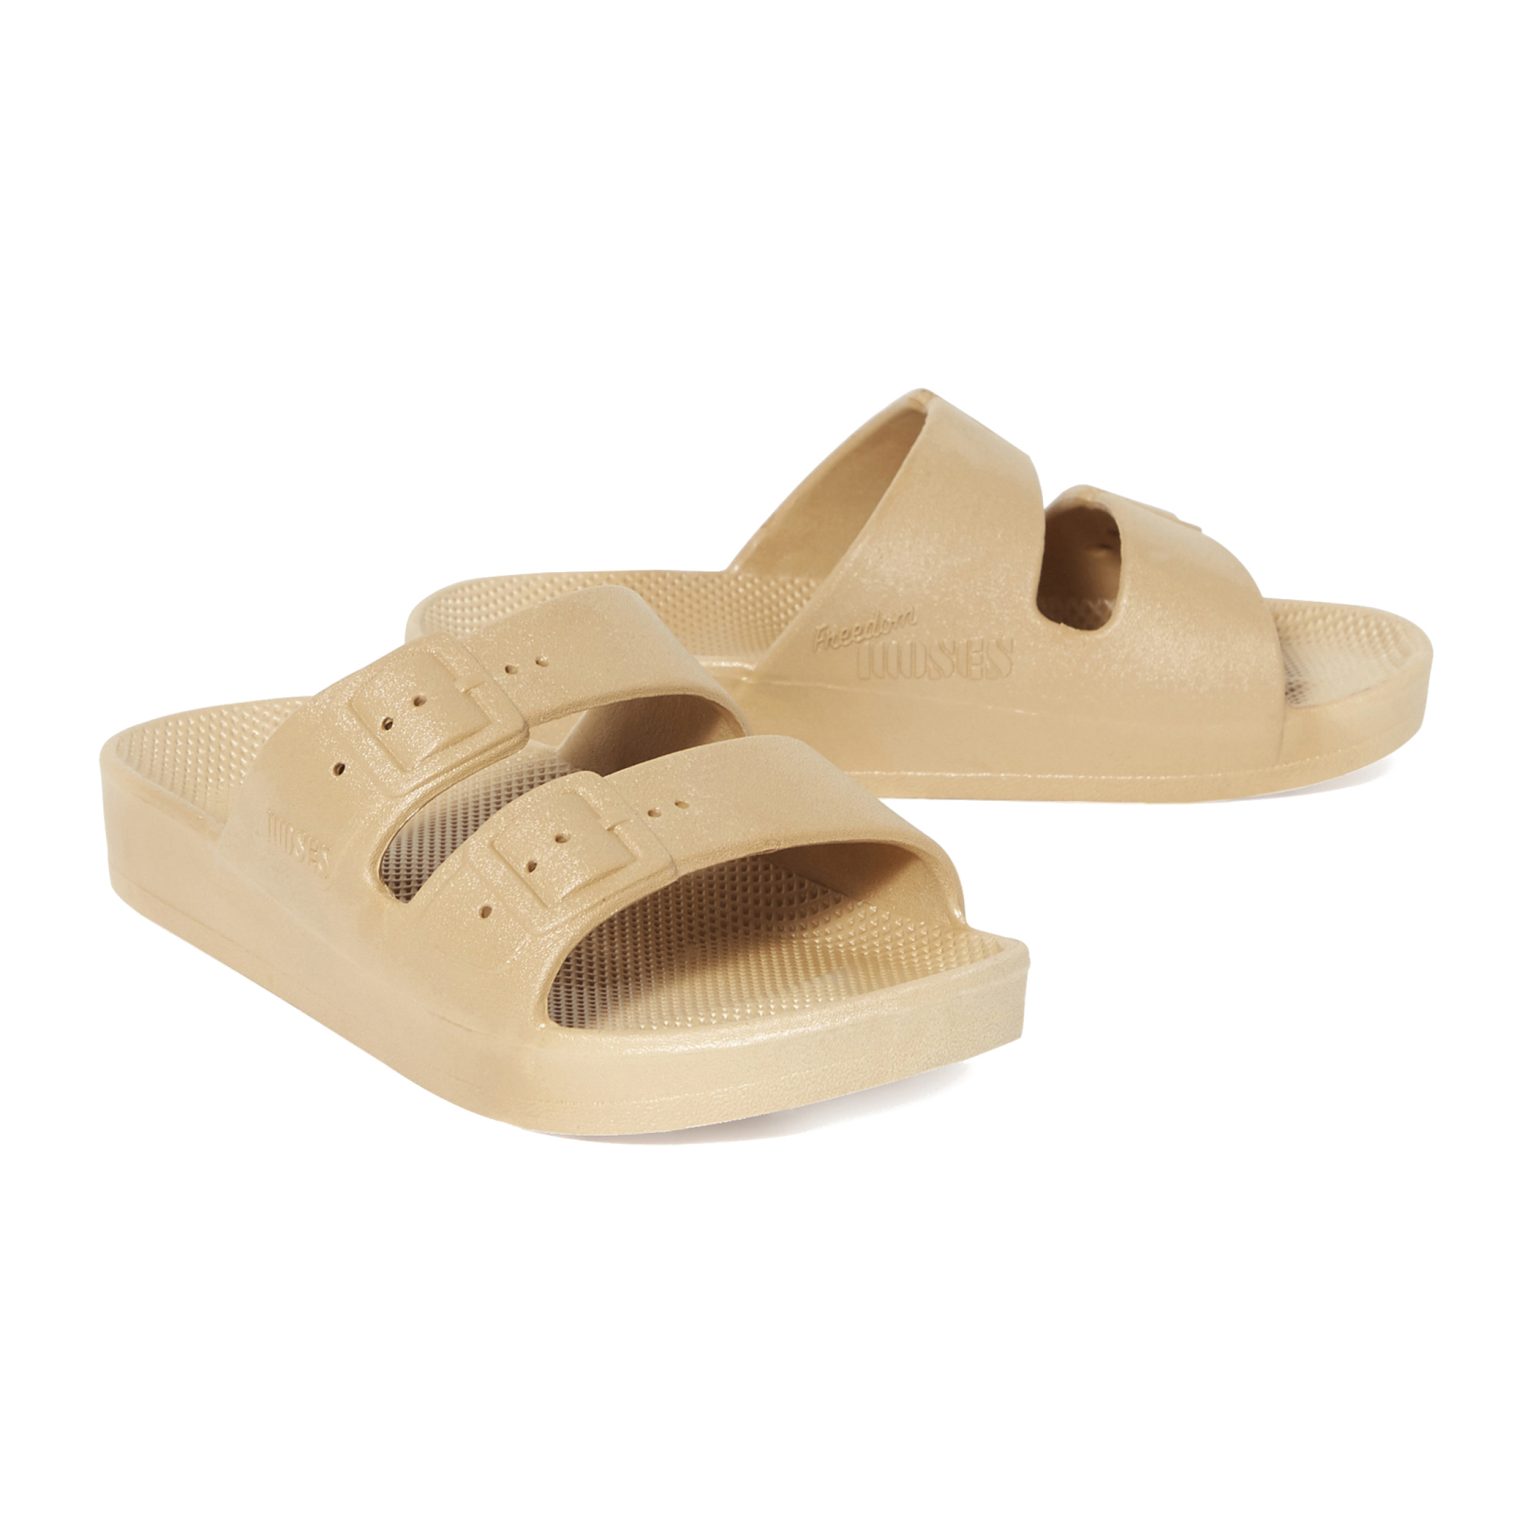 freedom moses sandals